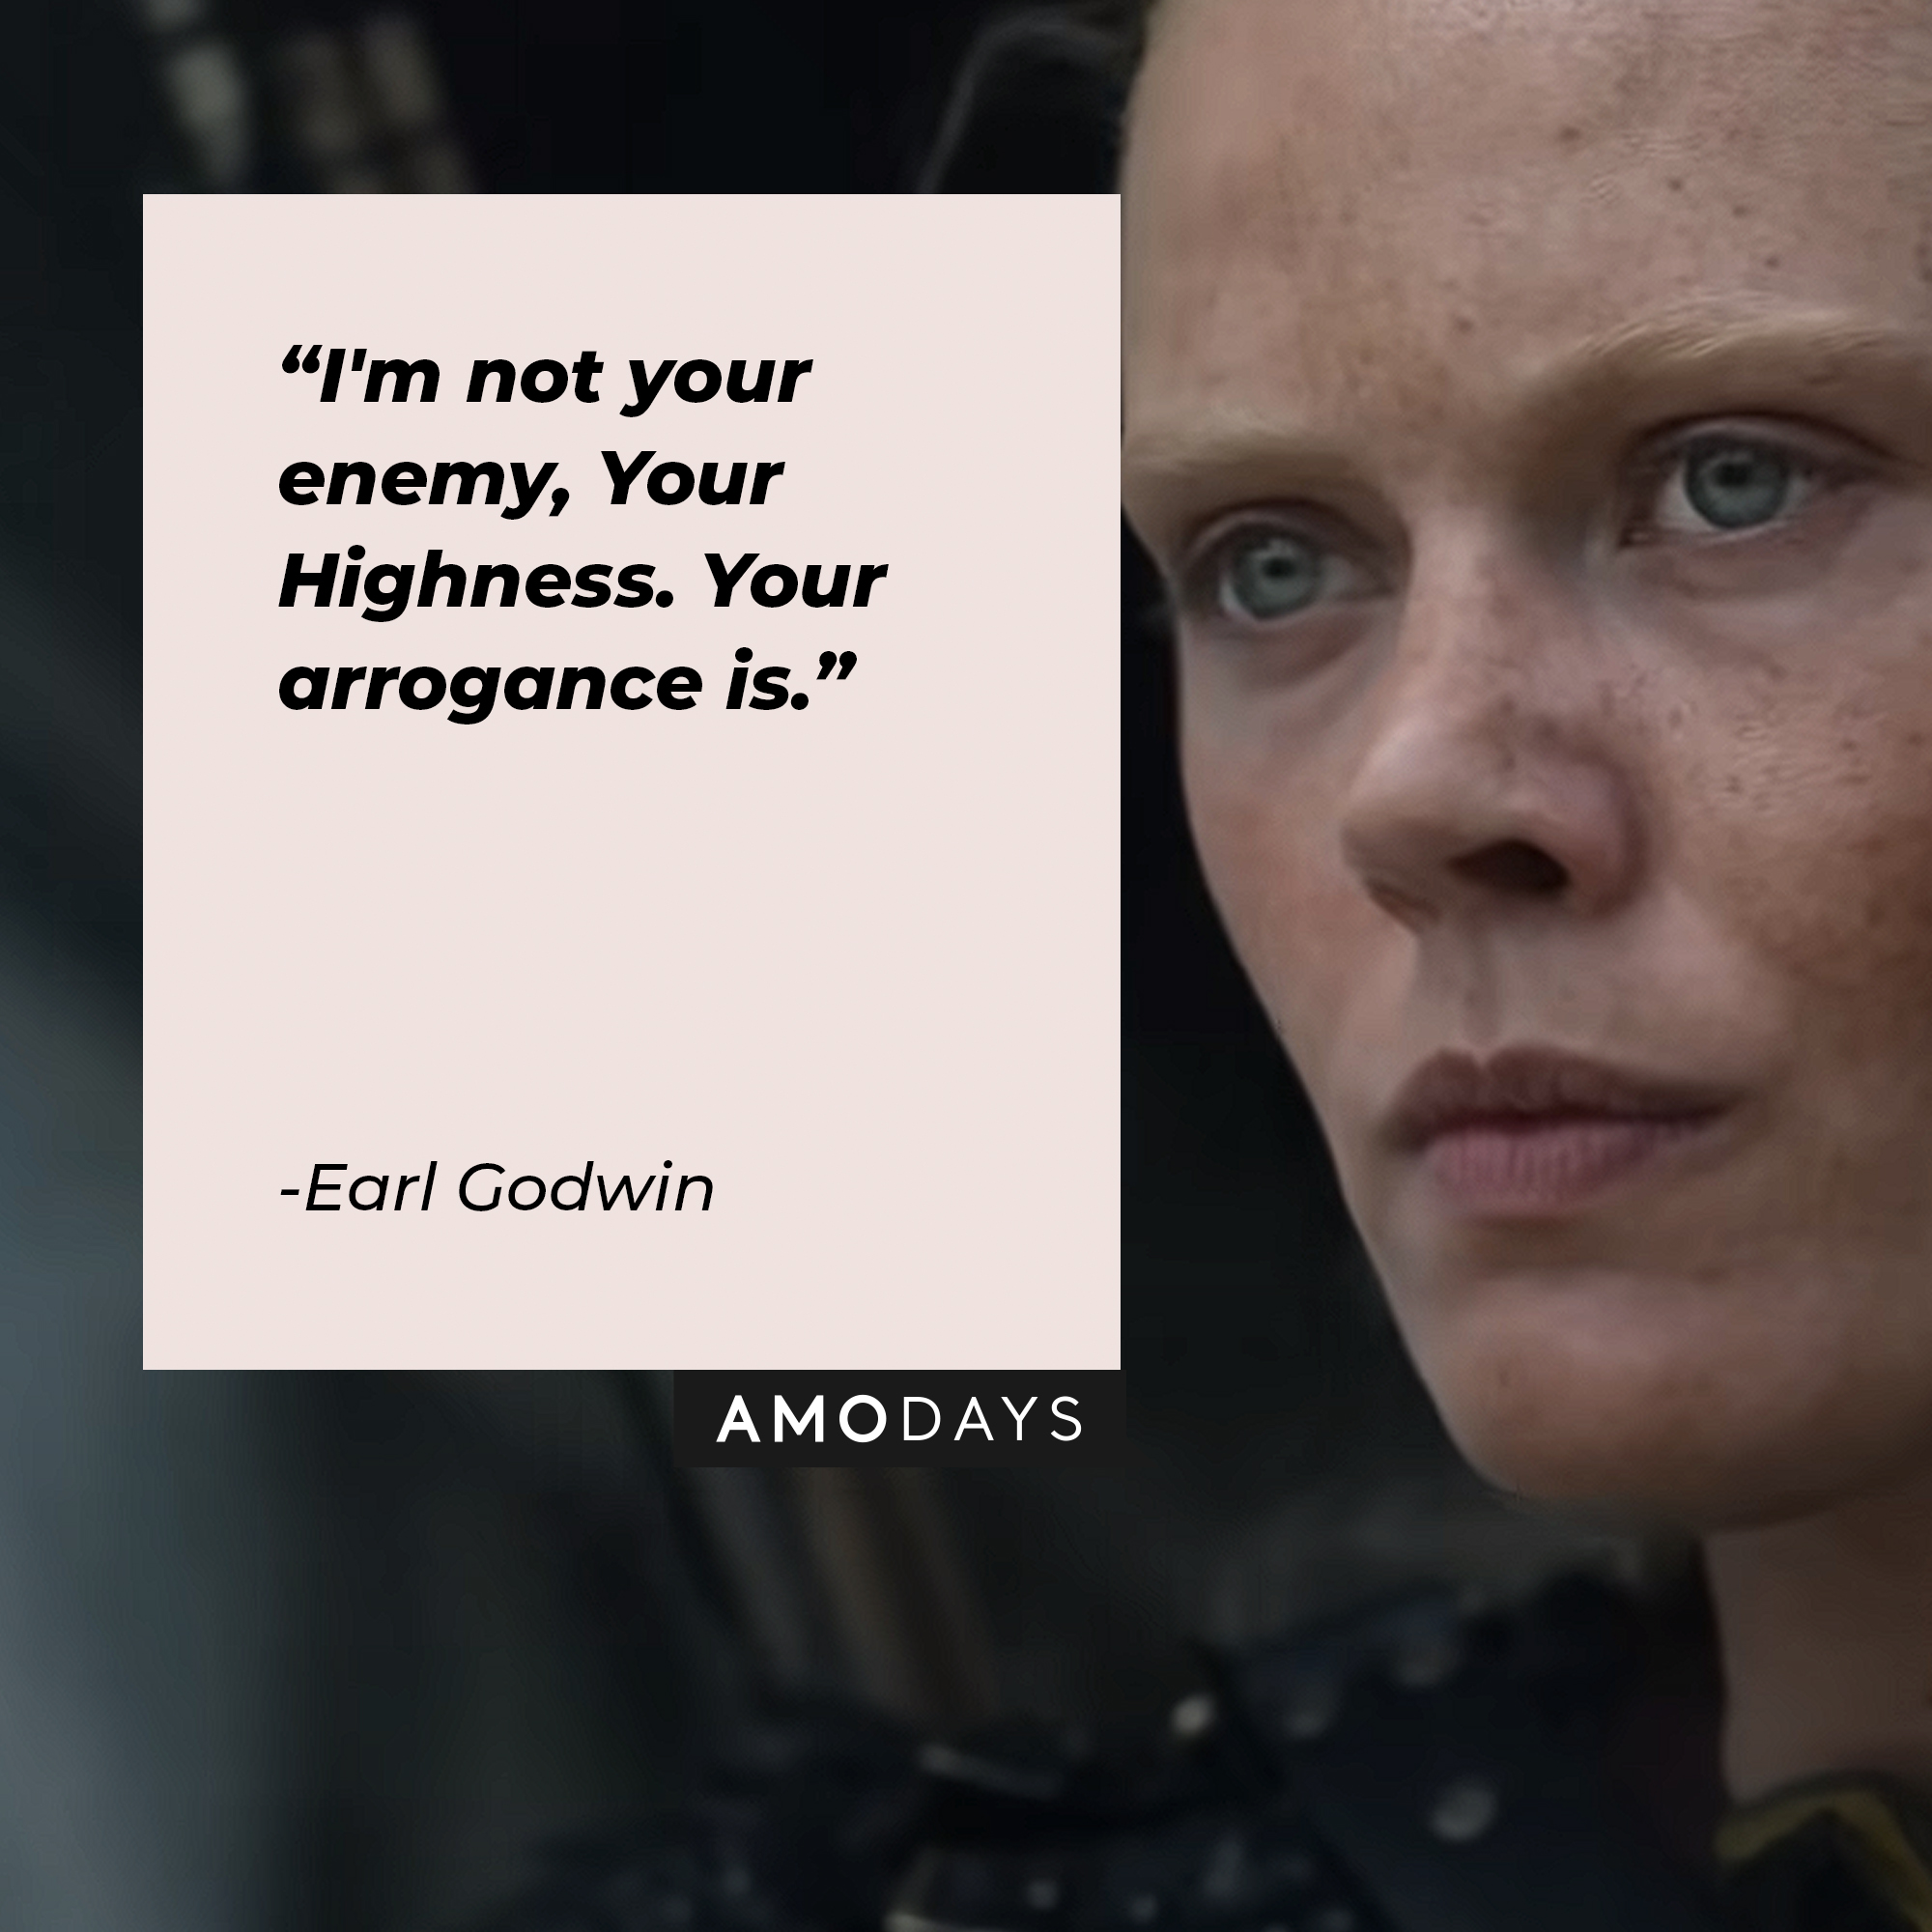 Earl Godwin's quote: "I'm not your enemy, Your Highness. Your arrogance is." | Image: youtube.com/Netflix